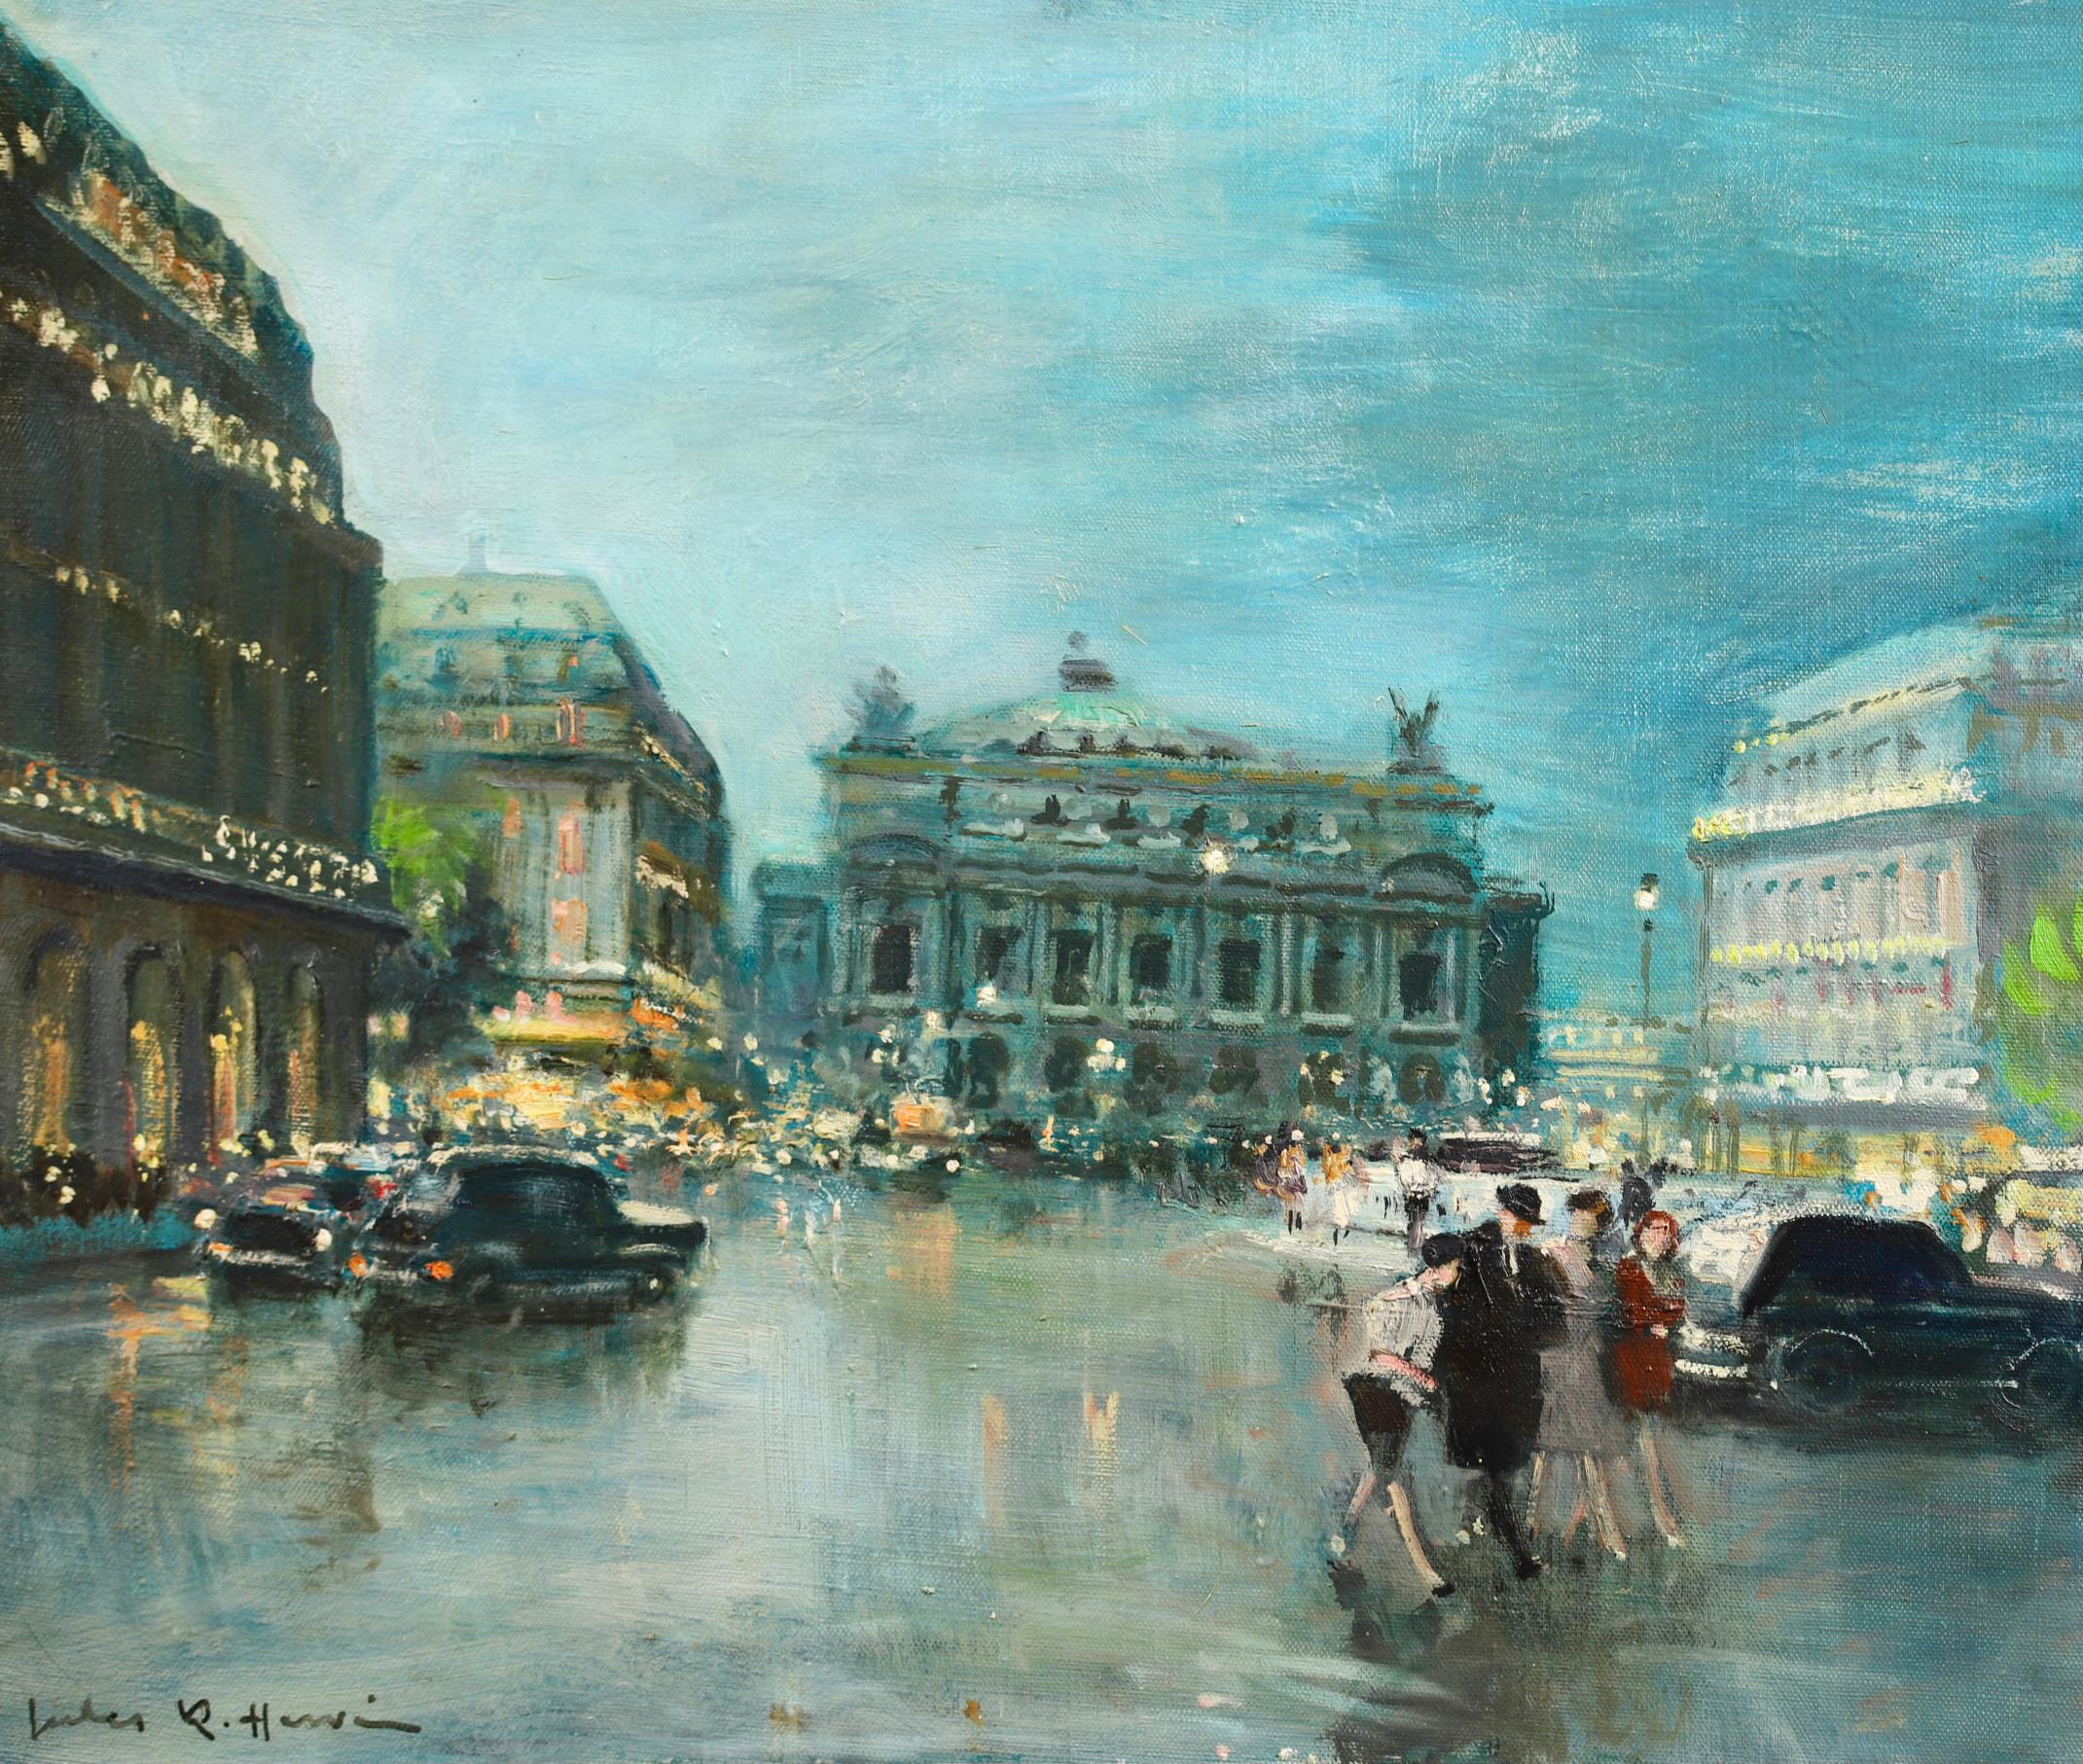 Signed impressionist figures in cityscape oil on canvas circa 1940 by French painter Jules Rene Herve. This bustling evening scene depicts a view of The Place de l'Opera square in Paris, France.   

Signature:
Signed lower left & again